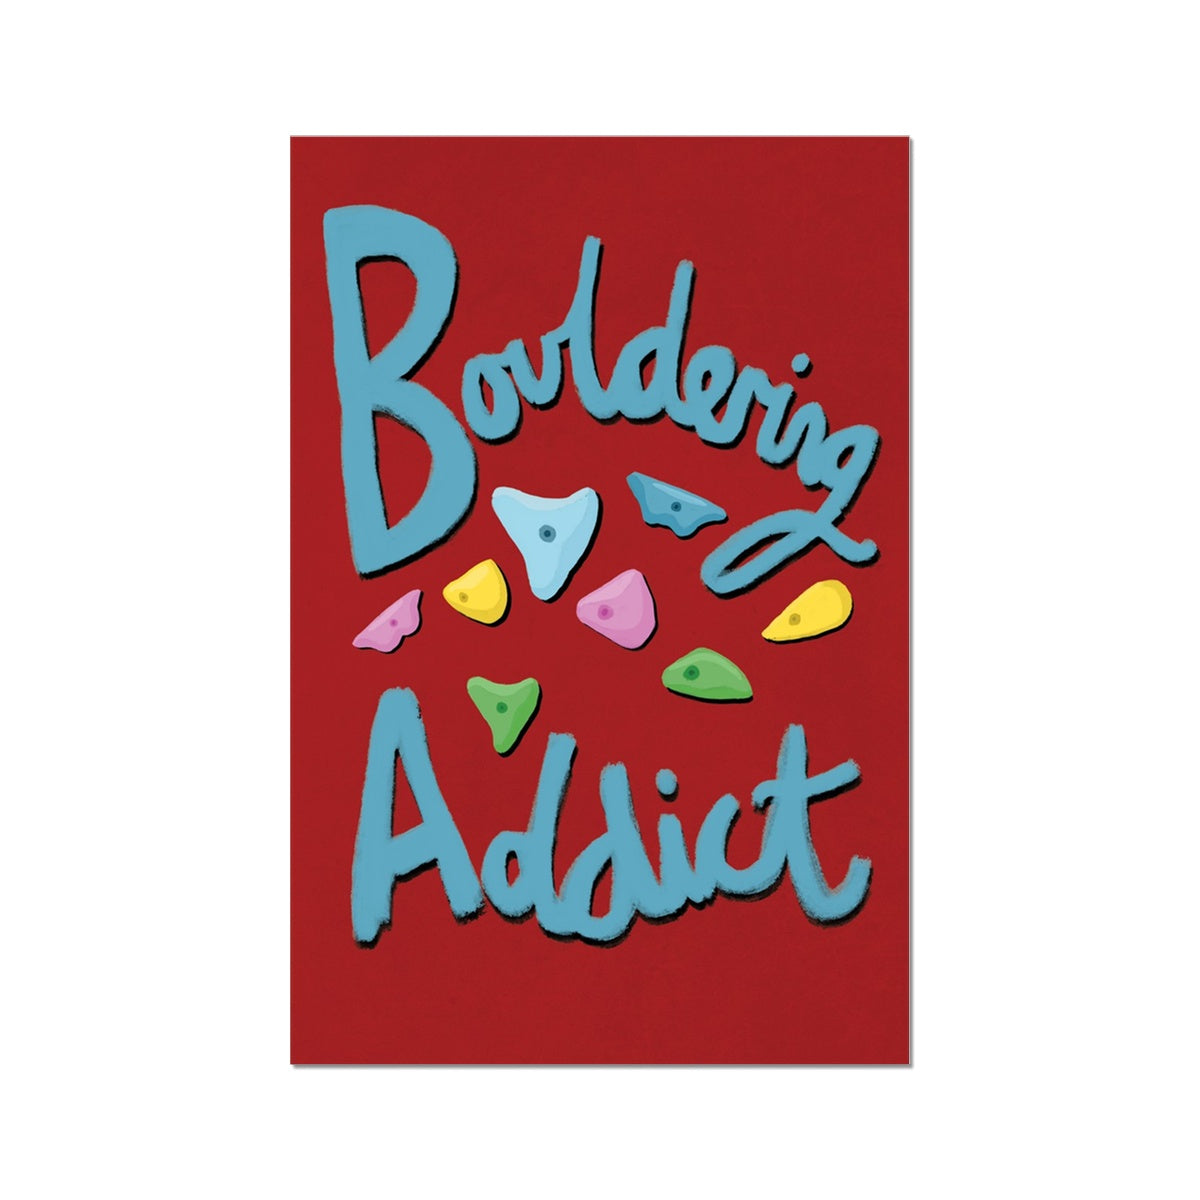 Bouldering Addict - Red and Blue Fine Art Print